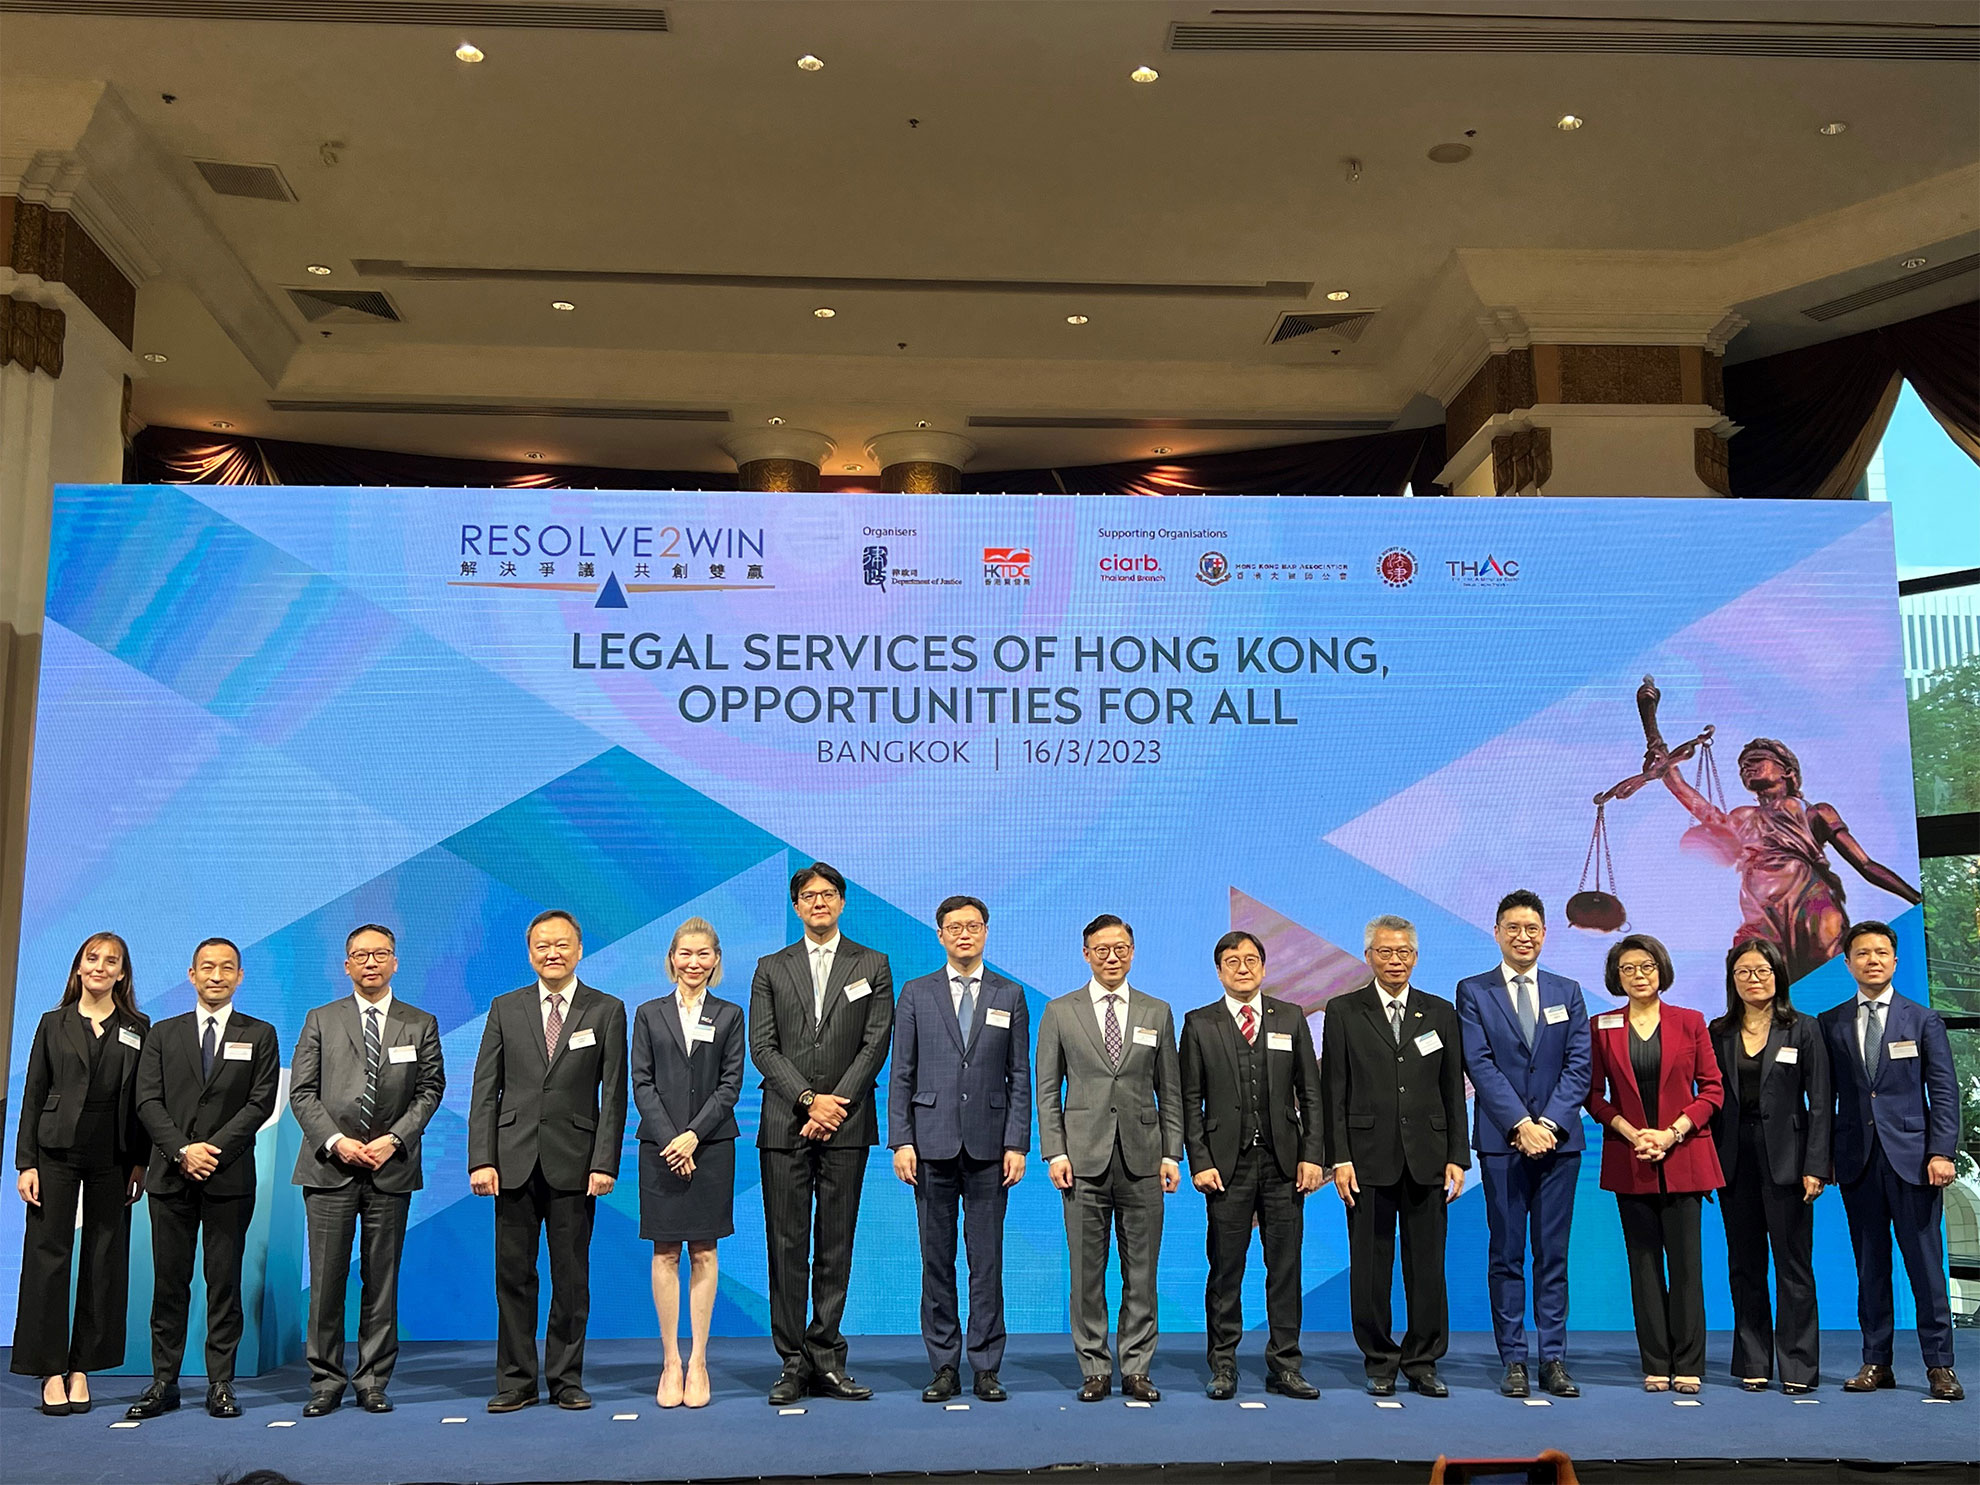 The Deputy Secretary for Justice, Mr Cheung Kwok-kwan, attended the “Resolve2Win - Legal Services of Hong Kong, Opportunities for All”, an international promotional campaign co-organised by the Department of Justice and the Hong Kong Trade Development Council (HKTDC), in Bangkok, Thailand, today (March 16). Photo shows Mr Cheung (seventh right) with the speakers and representatives from the HKTDC and supporting organisations at the event.